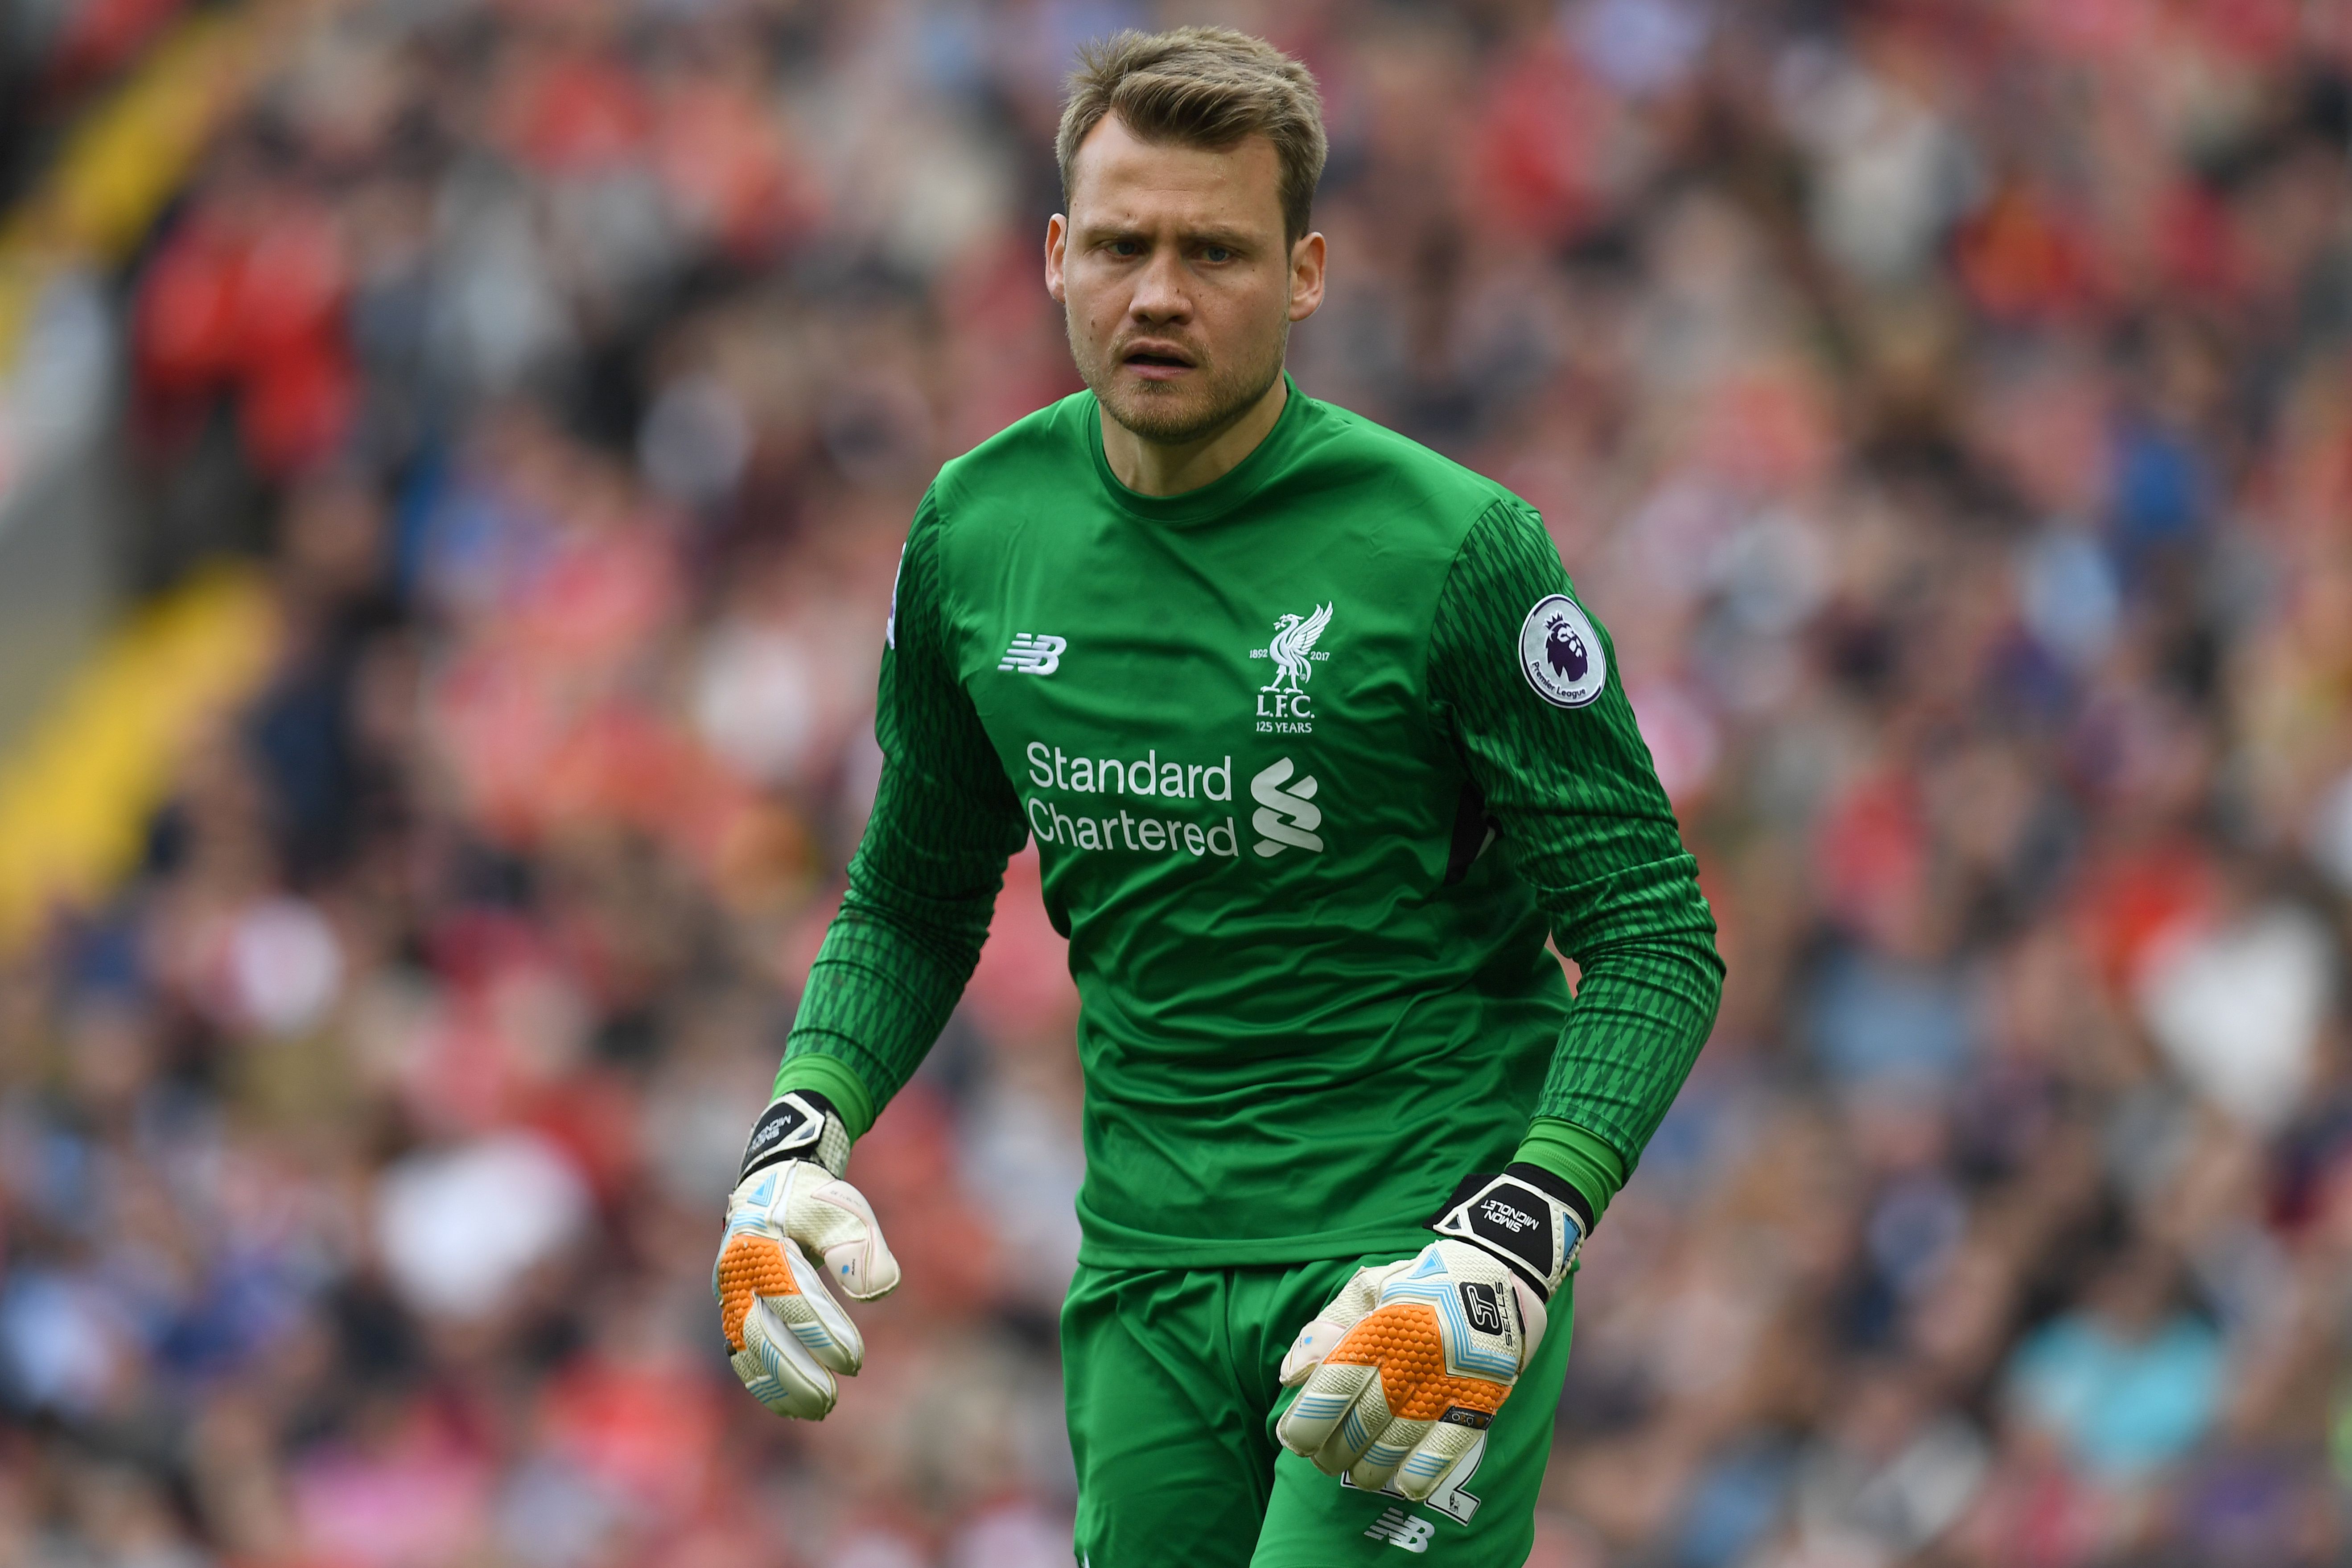 Liverpool's Belgian goalkeeper Simon Mignolet reacts during the English Premier League football match between Liverpool and Middlesbrough at Anfield in Liverpool, north west England on May 21, 2017. / AFP PHOTO / Paul ELLIS / RESTRICTED TO EDITORIAL USE. No use with unauthorized audio, video, data, fixture lists, club/league logos or 'live' services. Online in-match use limited to 75 images, no video emulation. No use in betting, games or single club/league/player publications.  /         (Photo credit should read PAUL ELLIS/AFP/Getty Images)